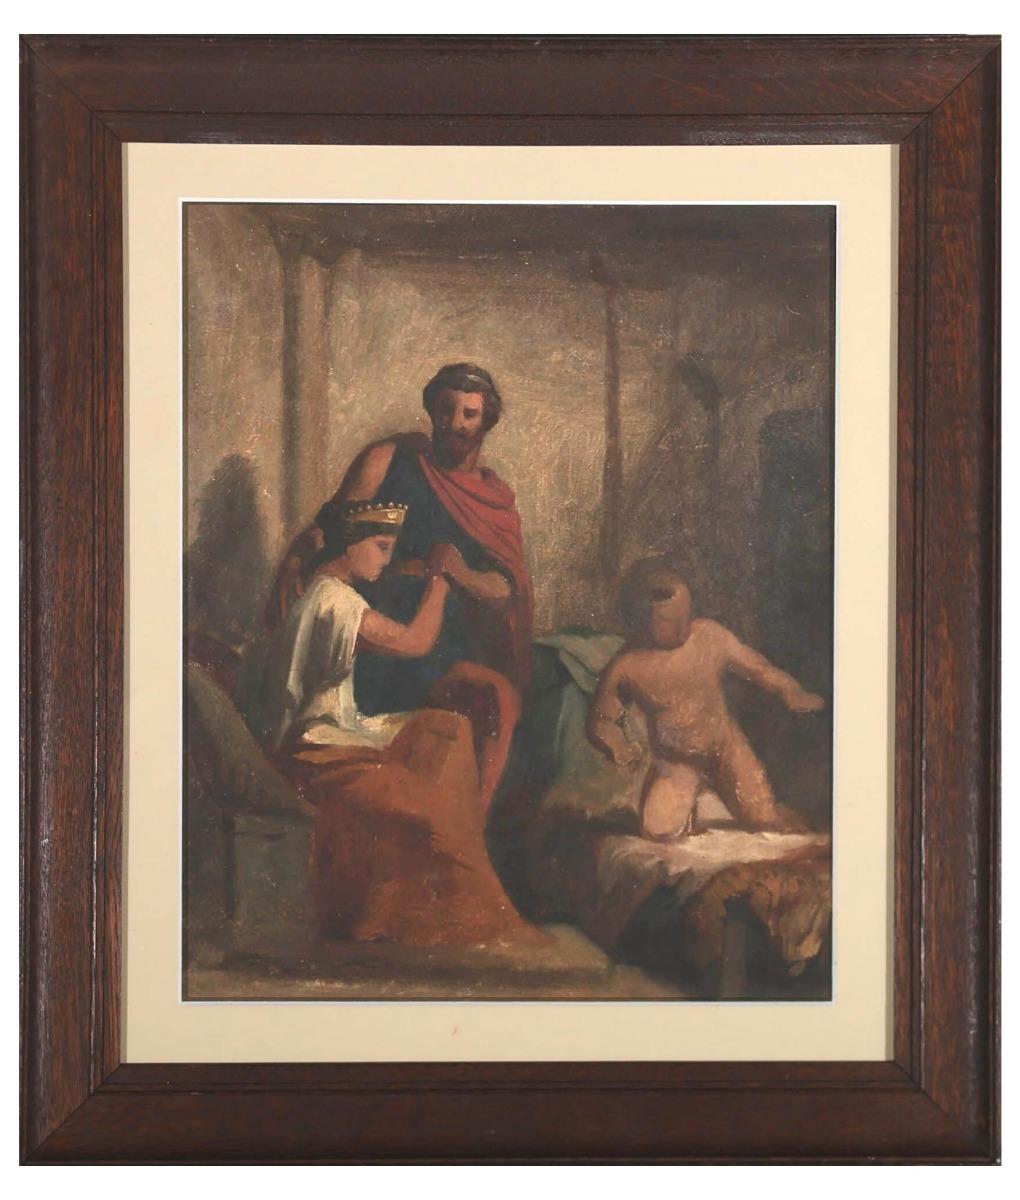 A striking early 20th Century oil scene showing a darkened interior, with a king and queen, in classical Roman style togas. A child kneels before them on a bed in a dynamic pose, adding much movement to the scene. The king holds the queen's hand and